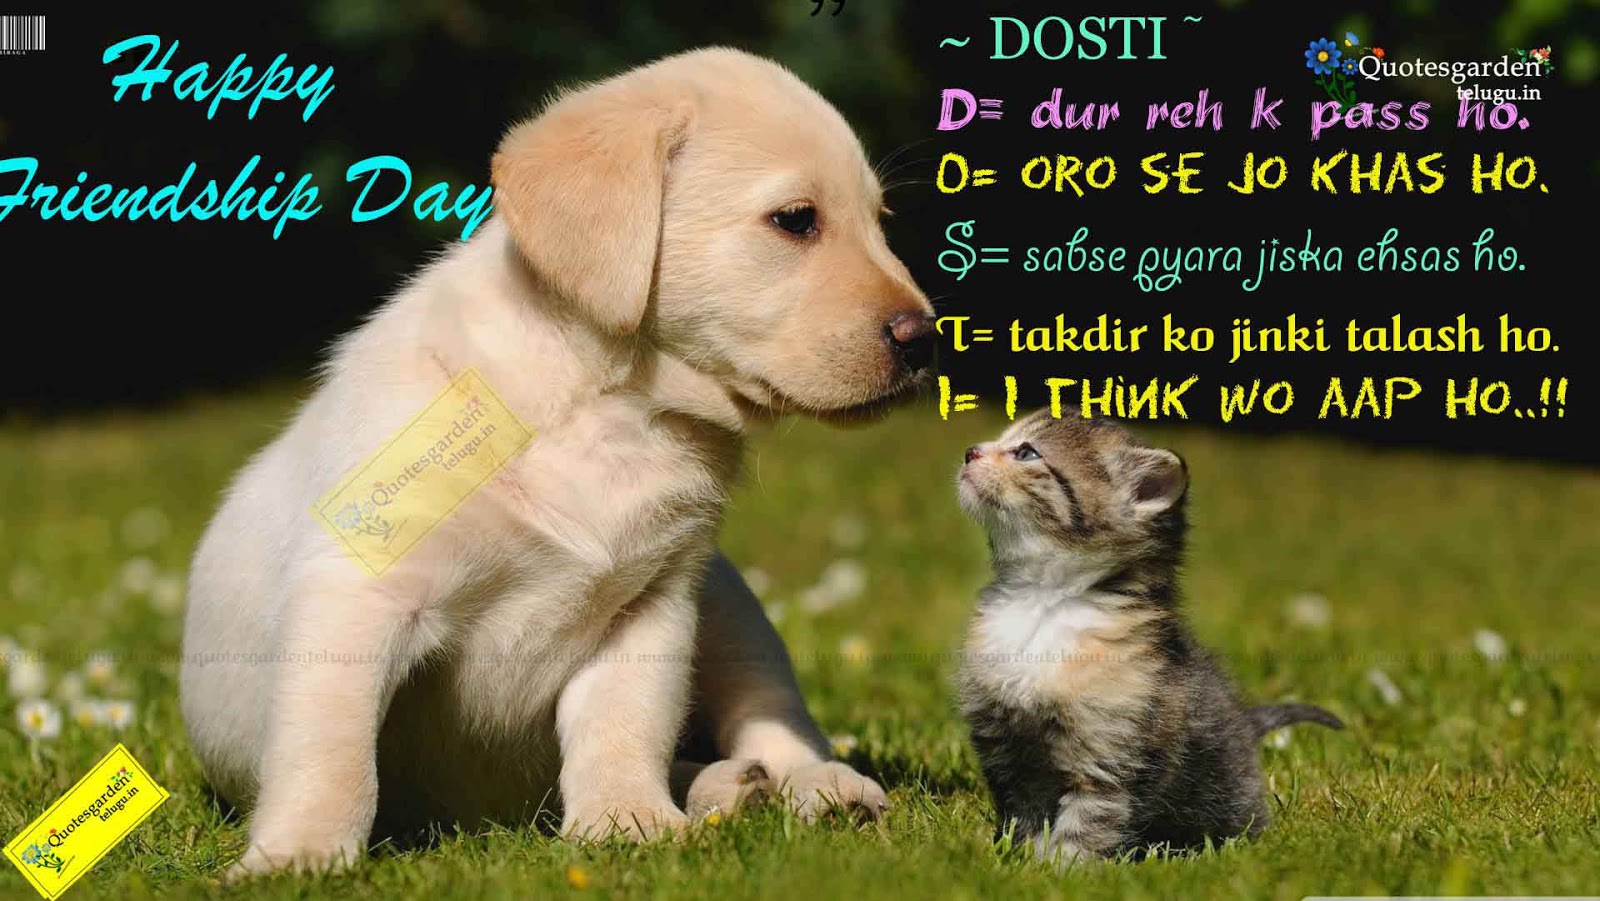 Best Hindi Friendship Day Quotes Wallpapers Greetings - Dog Friendship Day Quotes , HD Wallpaper & Backgrounds